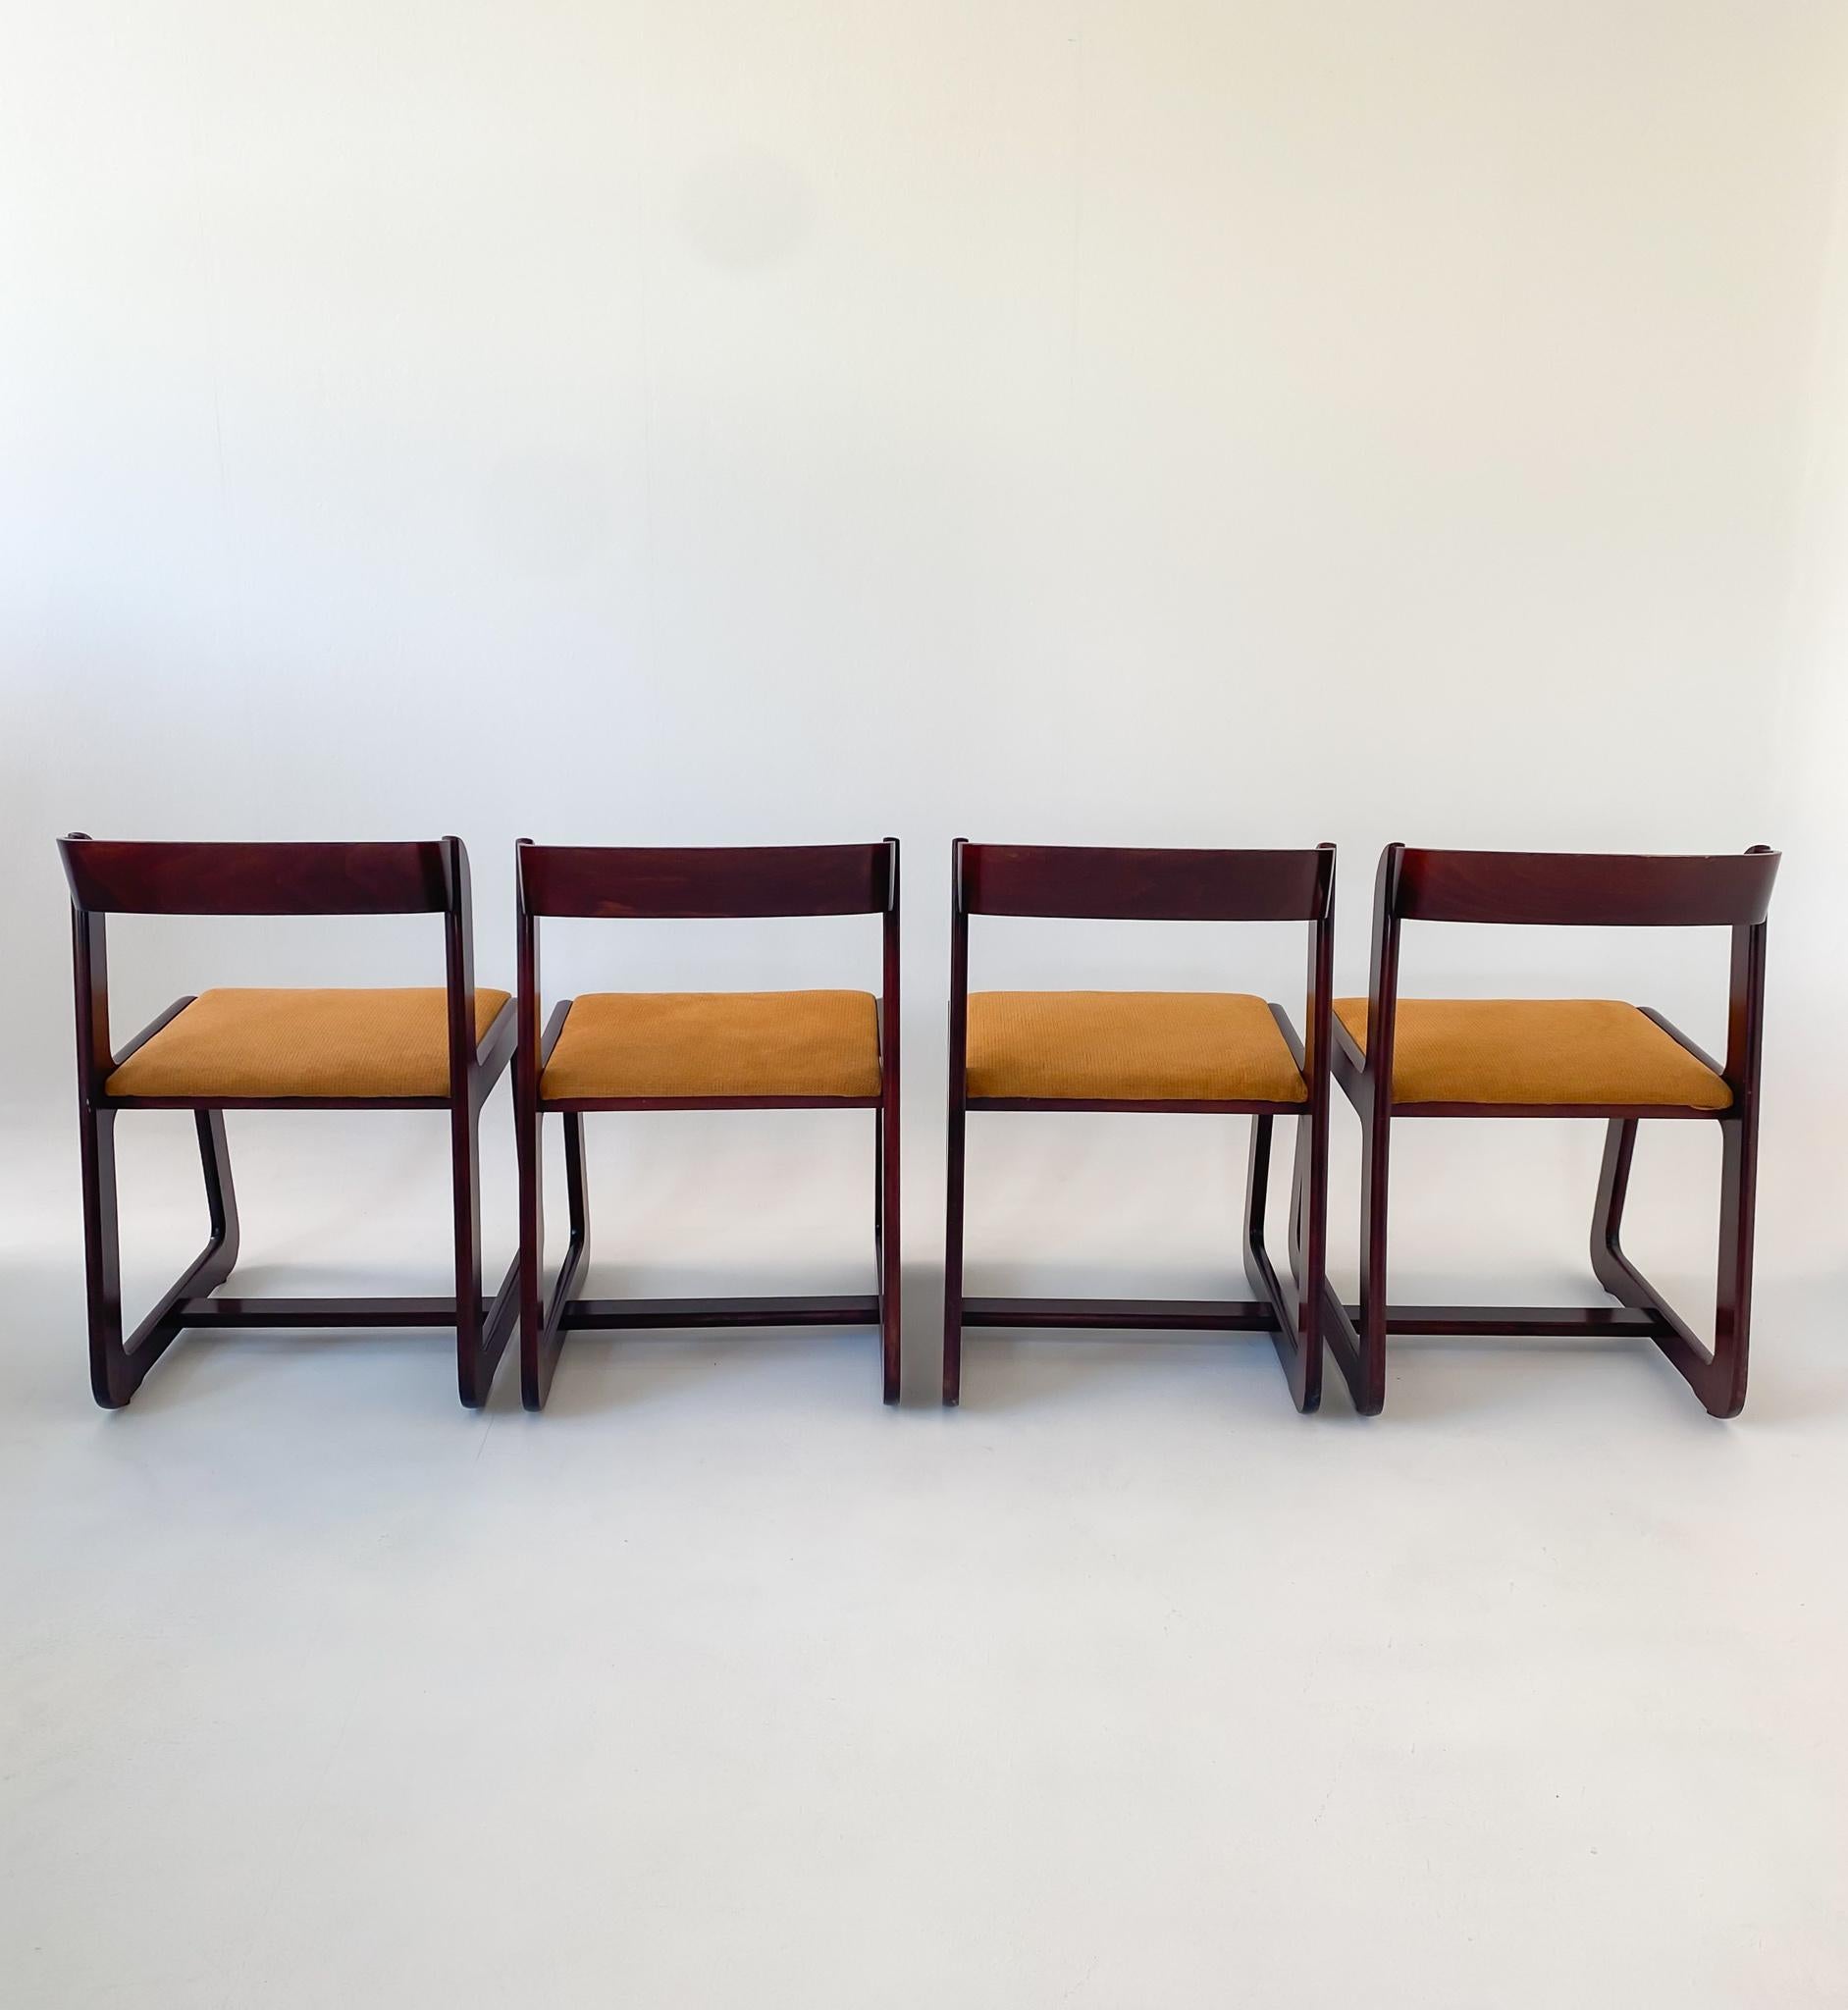 Late 20th Century Mid-Century Modern Set of 4 Dining Chairs by Willy Rizzo for Mario Sabot 1970s